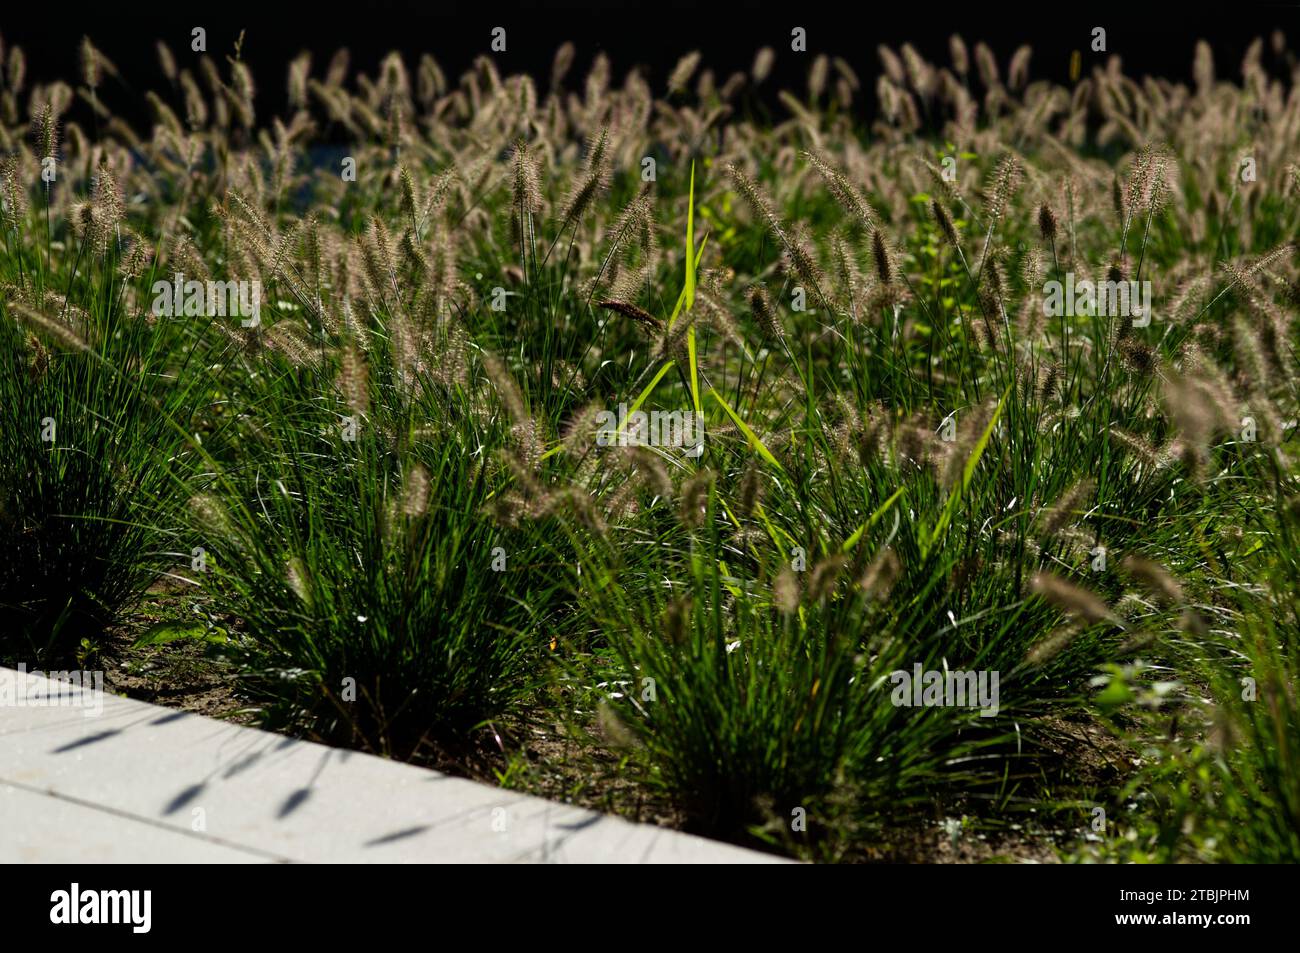 Zen-like scenery with a lighted green blade of grass in a cultivated grass garden Stock Photo